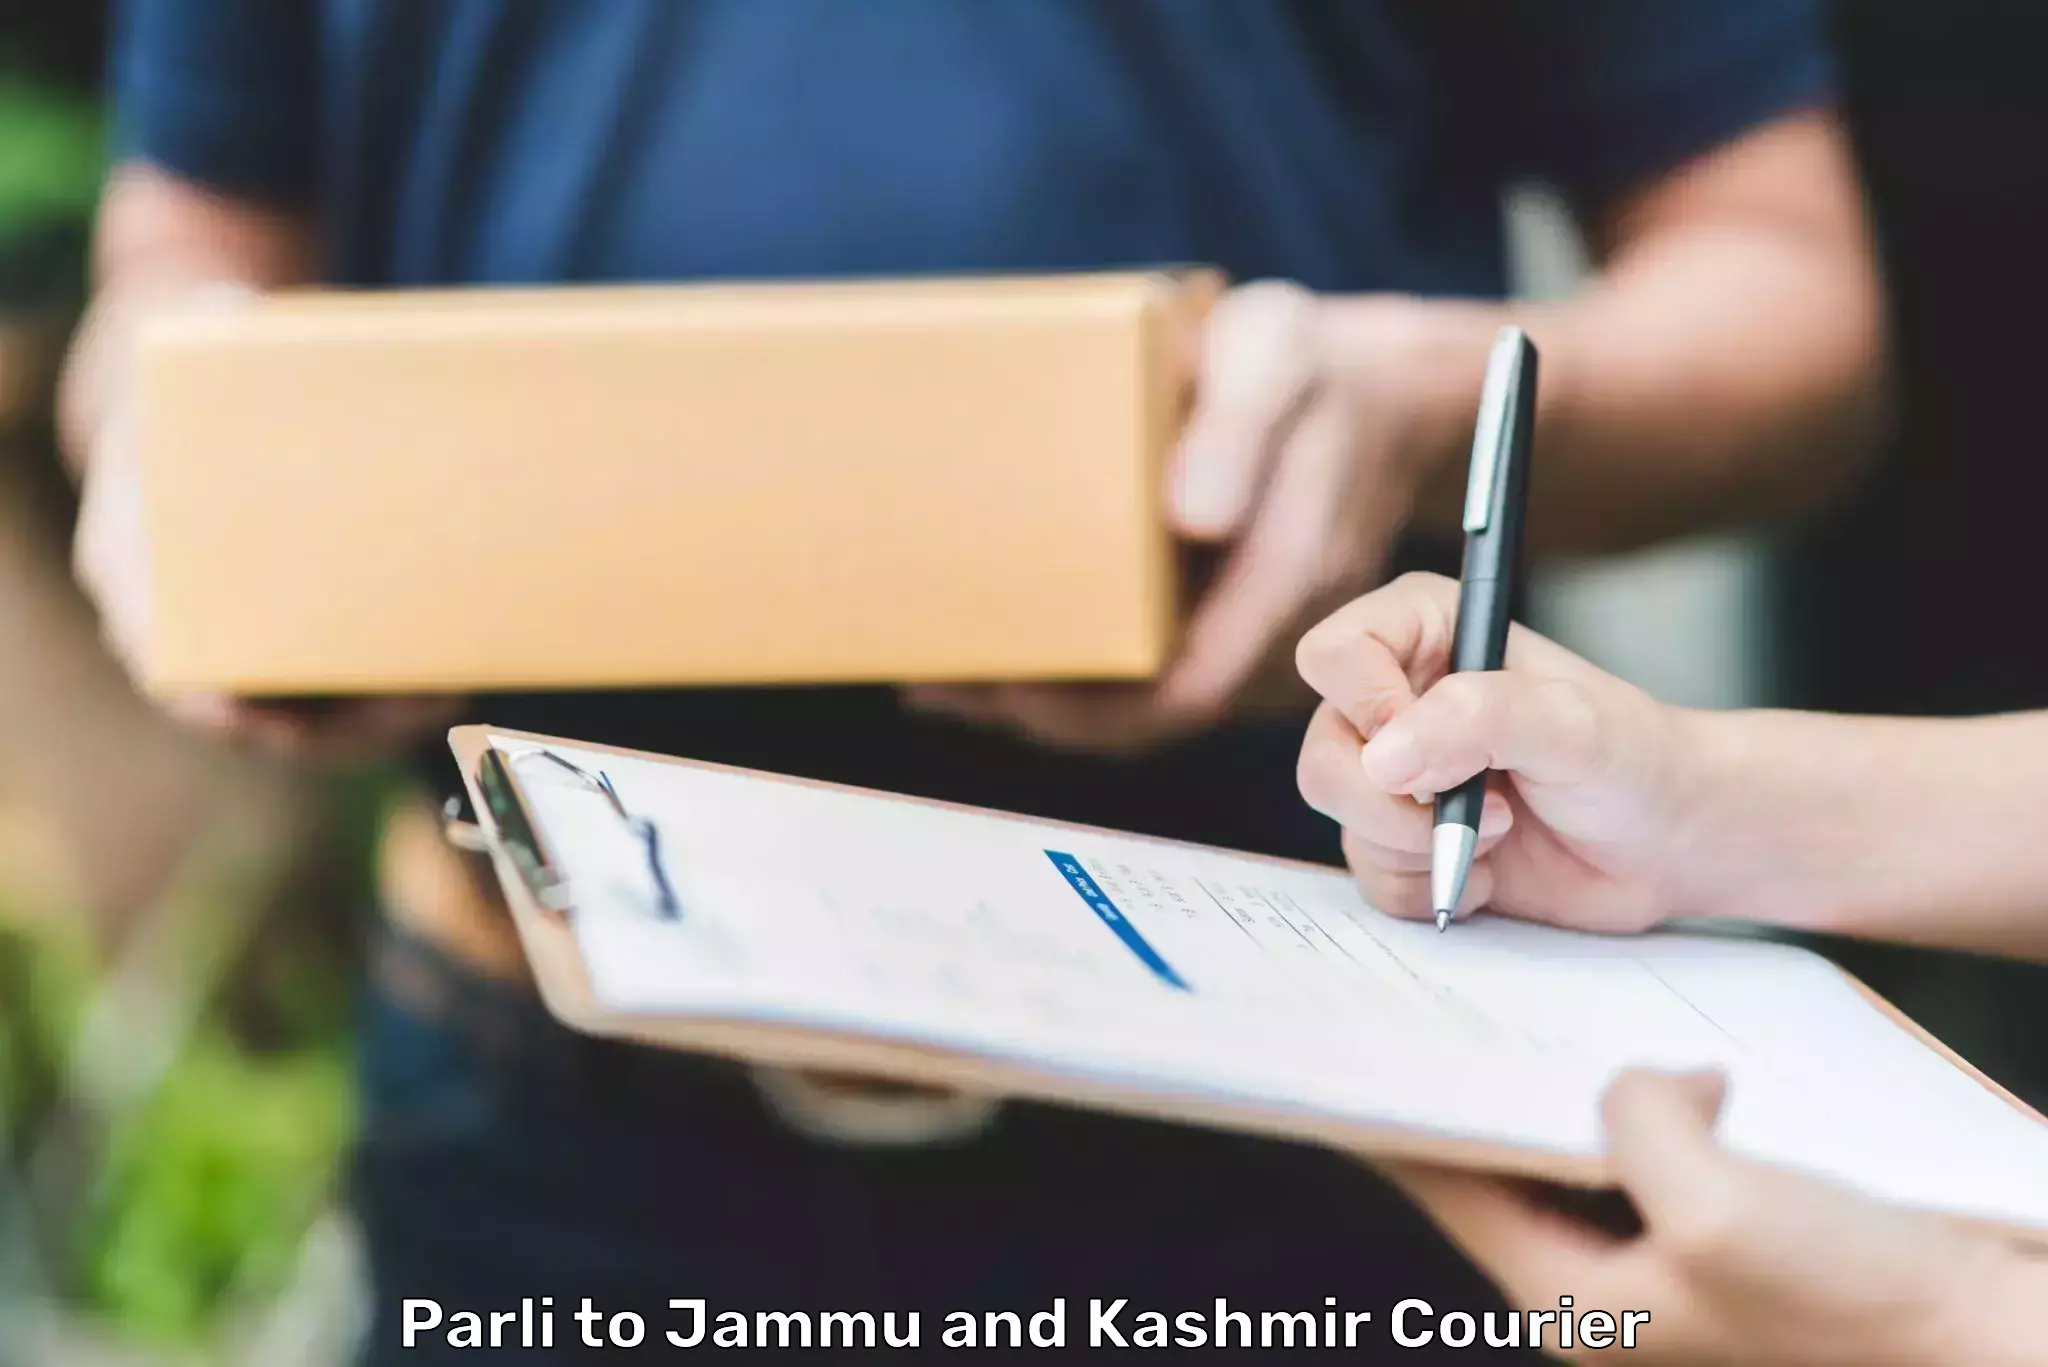 Secure shipping methods Parli to Jammu and Kashmir